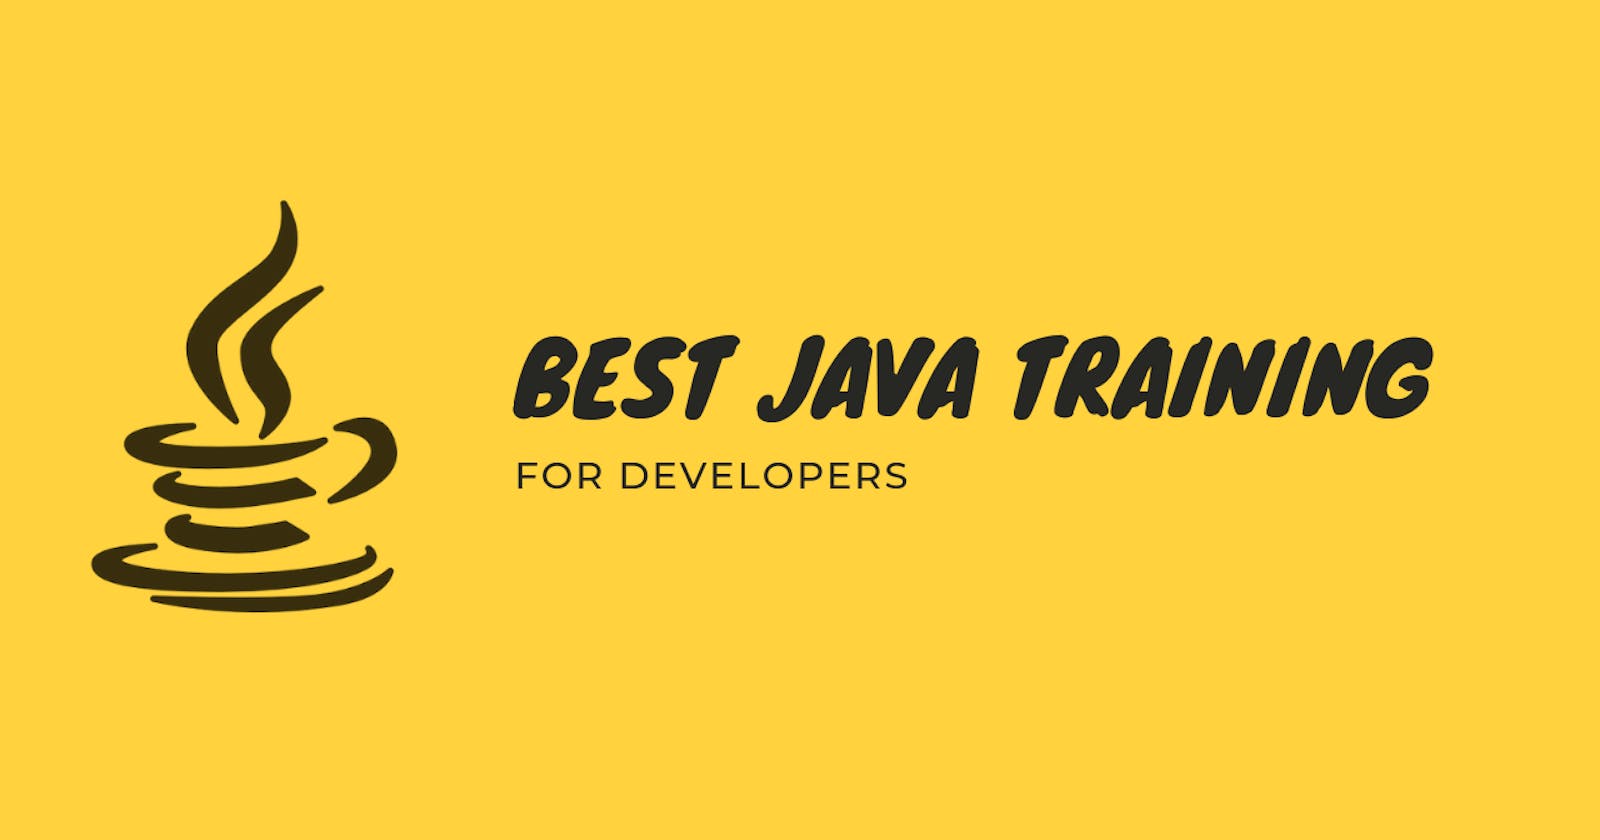 The best Java training for developers in Europe